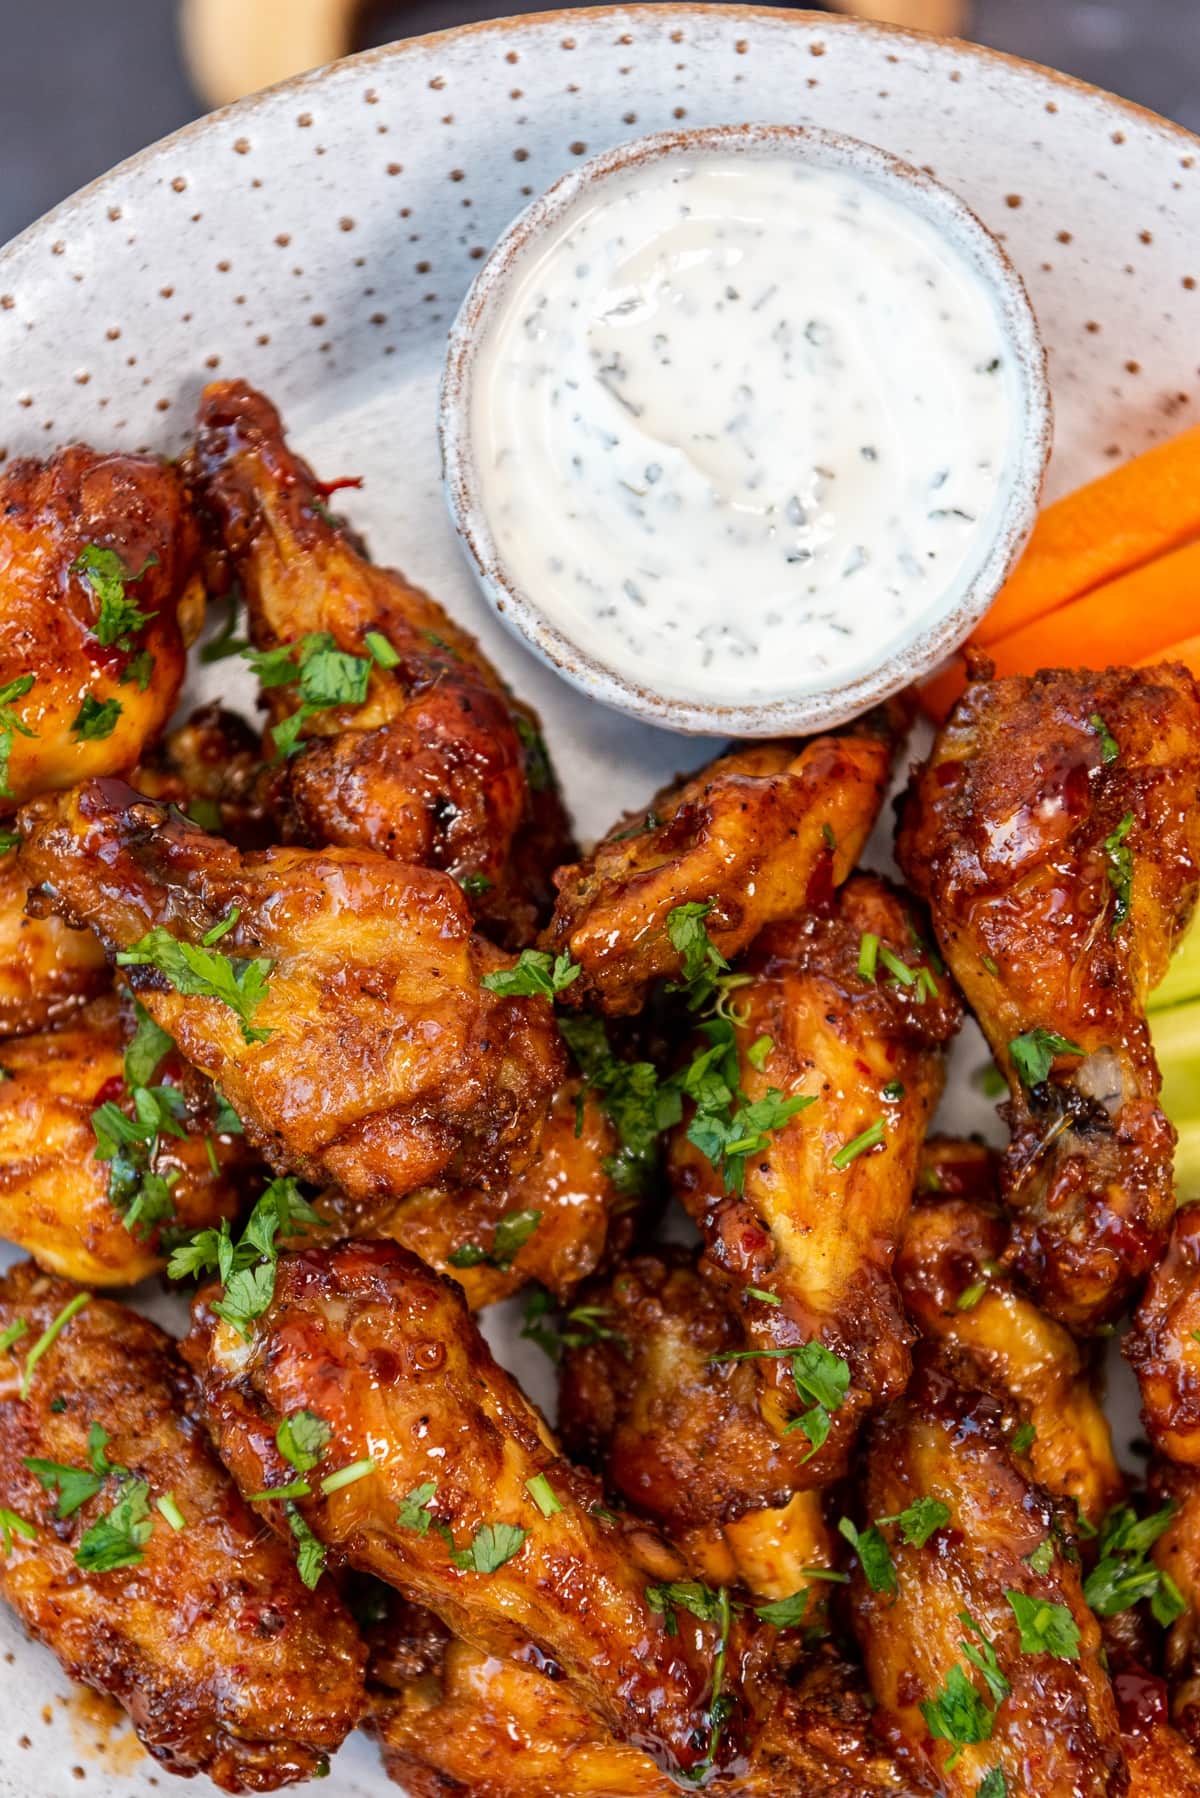 Spicy and crispy chicken wings served with a yogurt dip sauce, carrot and celery sticks on a white plate.